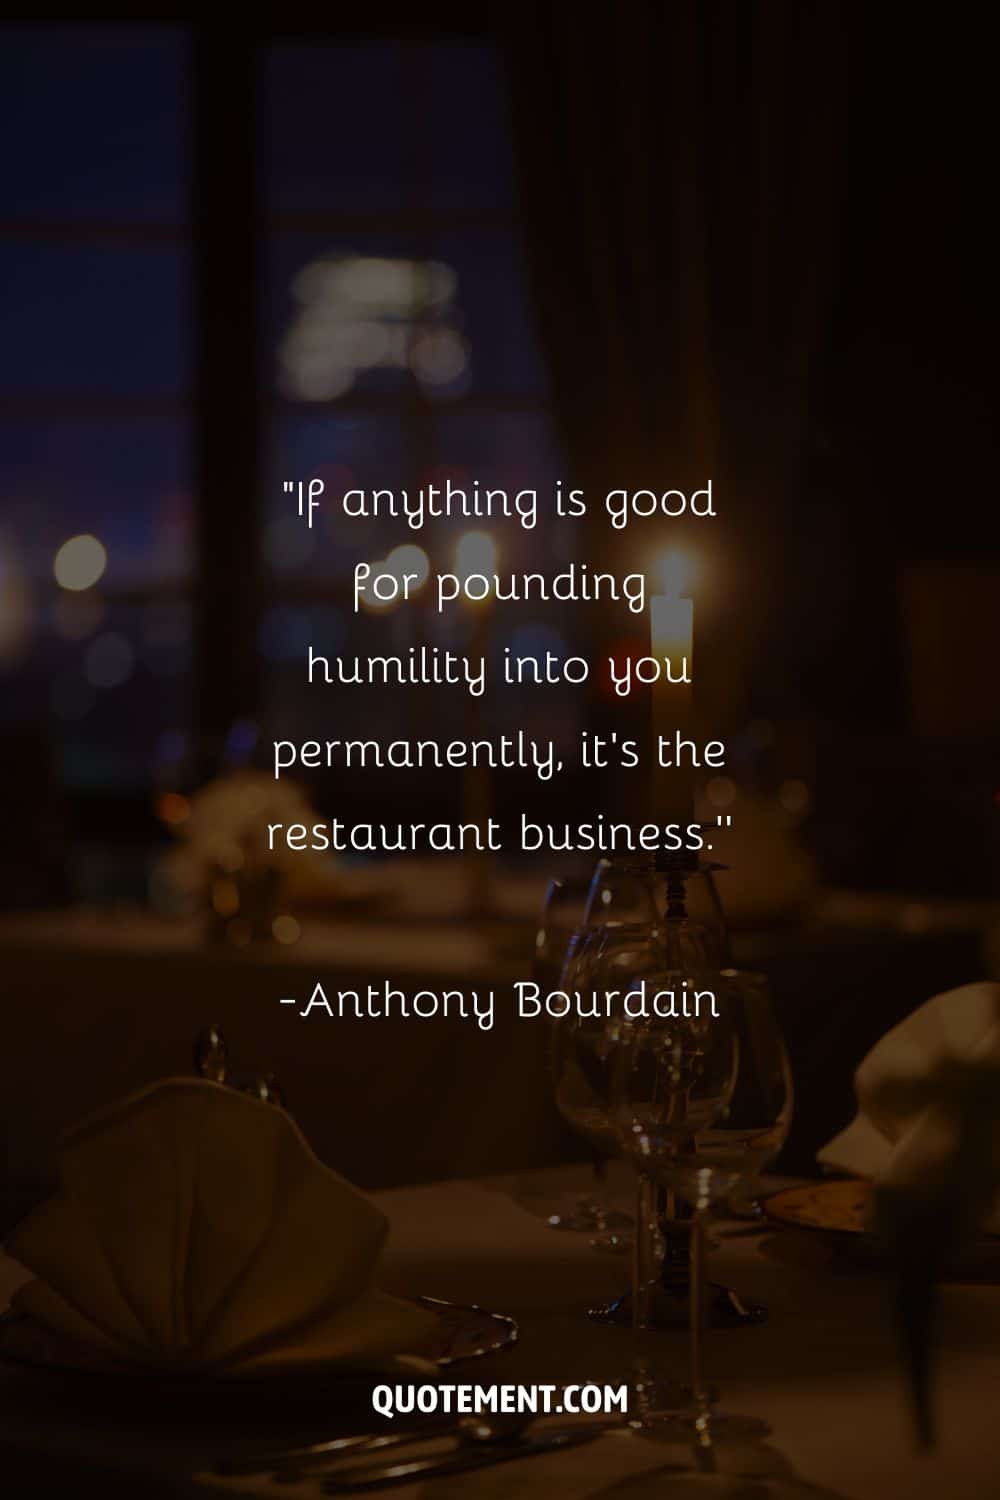 Image of a restaurant table representing a quote on the restaurant industry